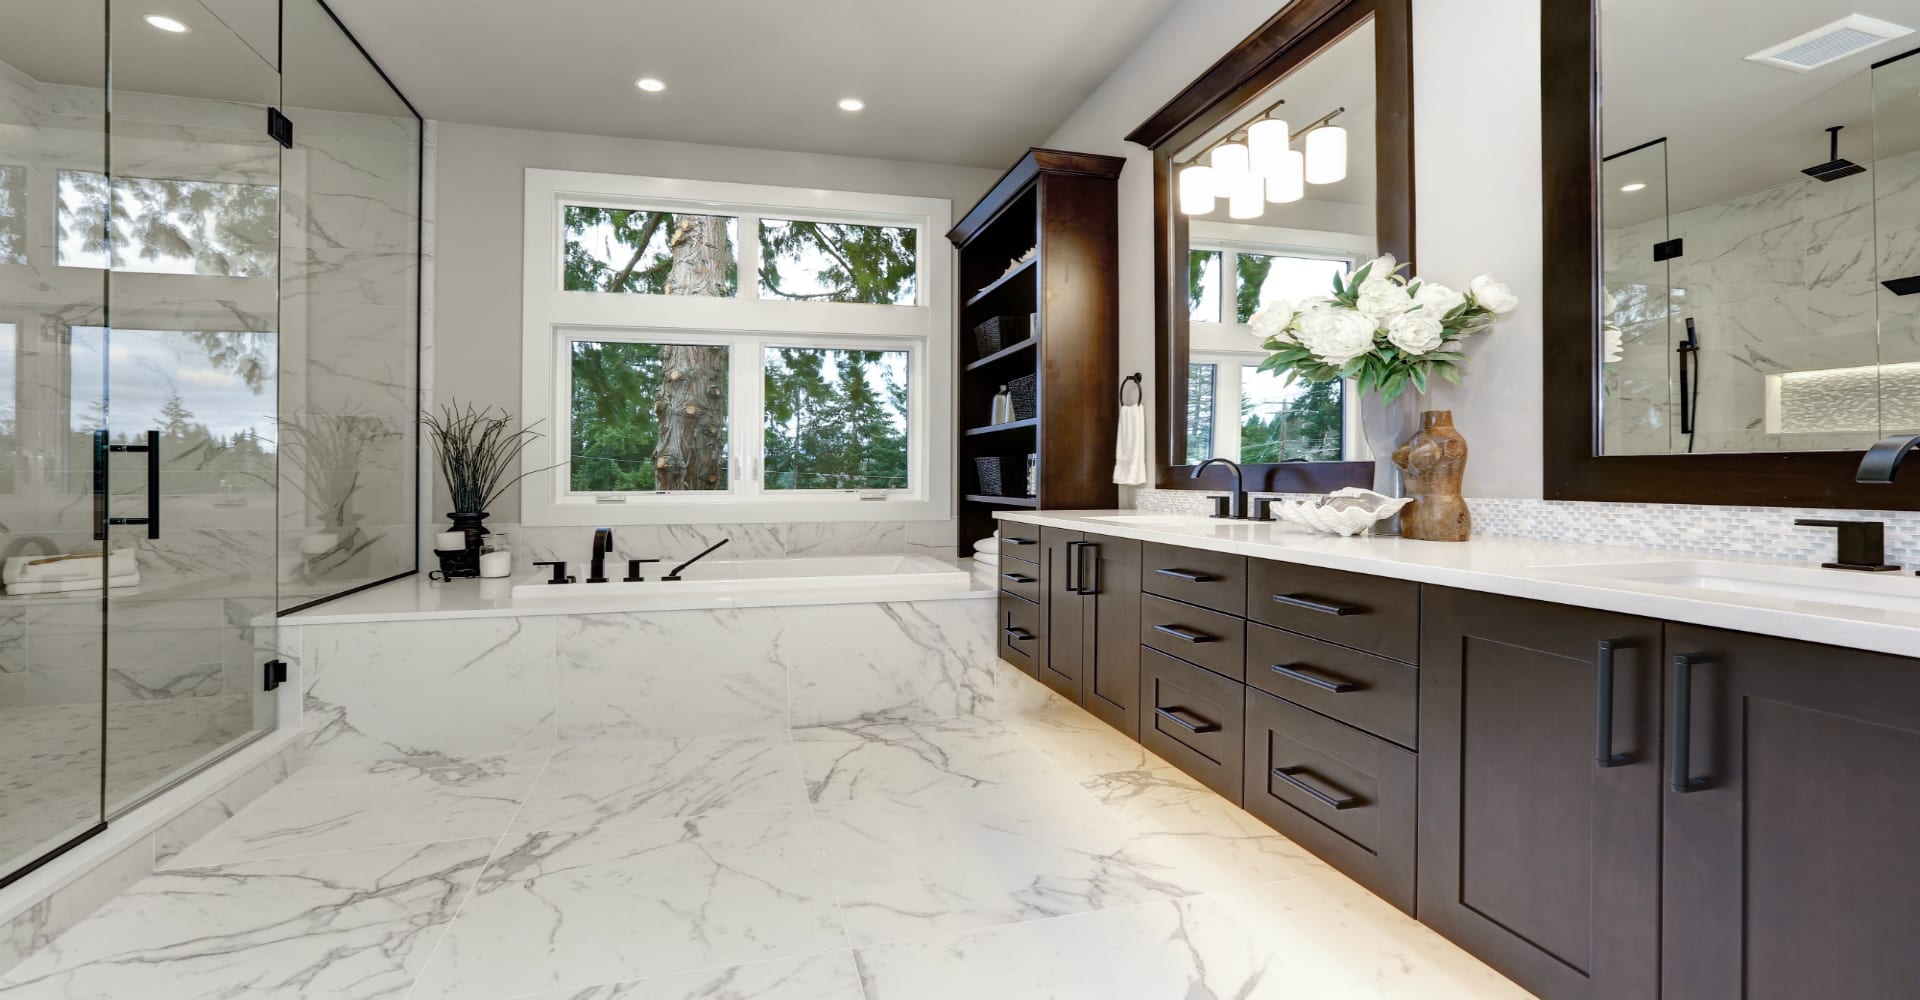 Bathroom Remodel Tips 5 Designs Which Will Never Be Out of Style